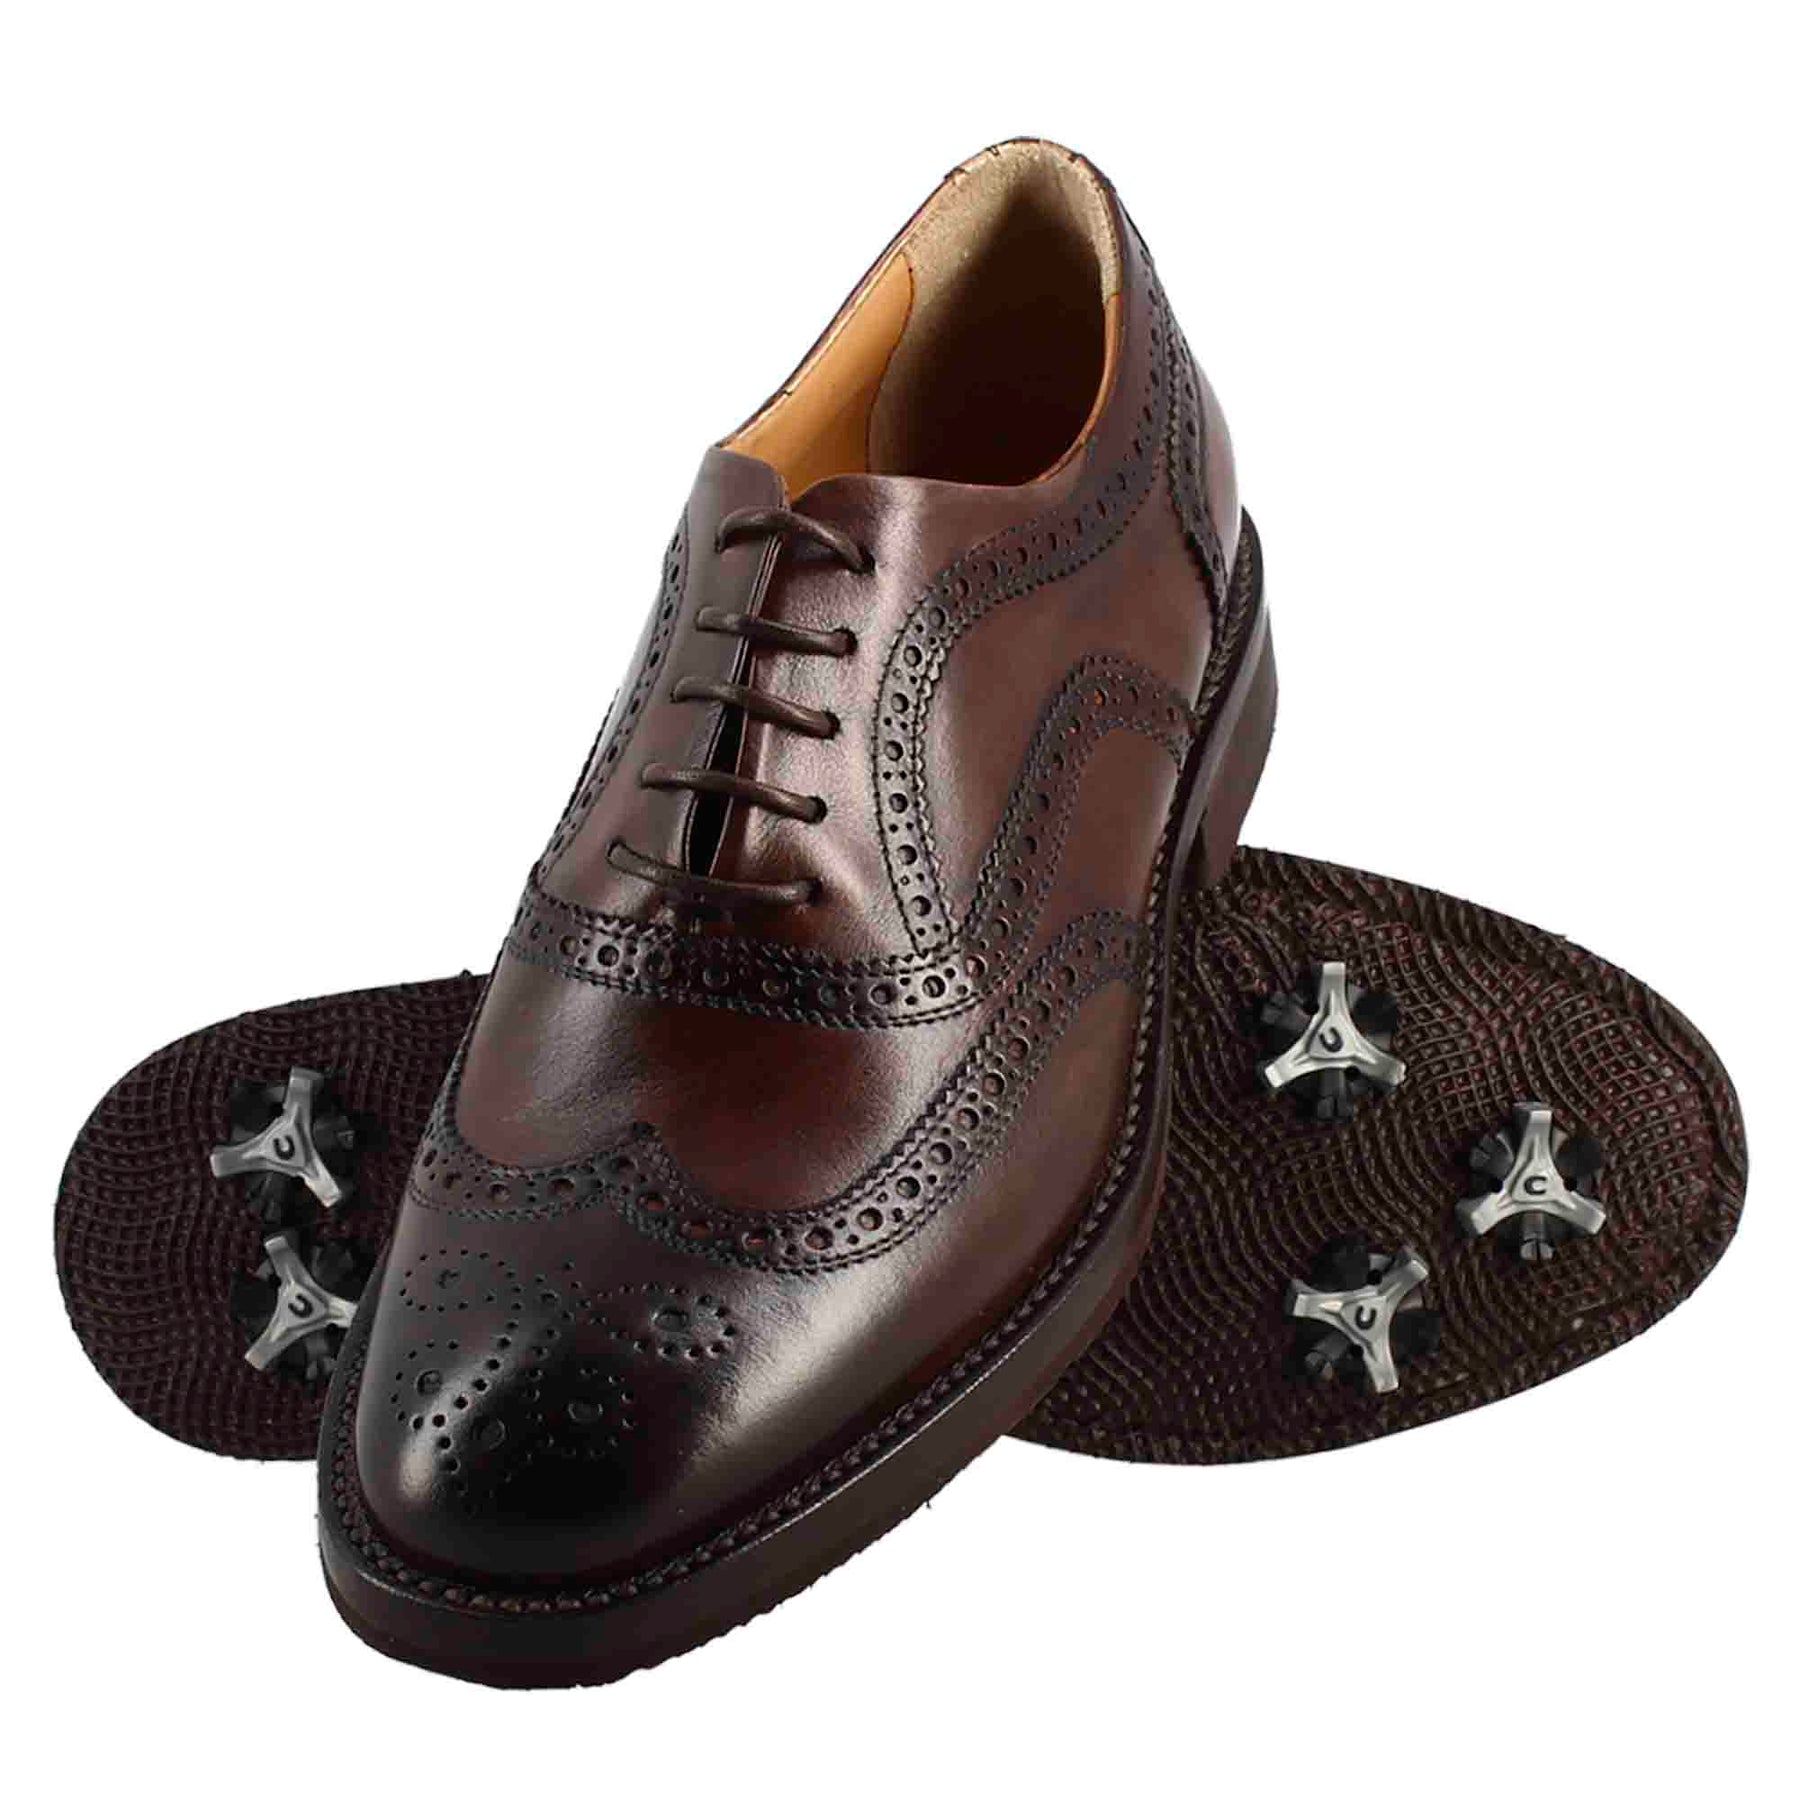 Women's golf shoes brown color handcrafted leather brogue details